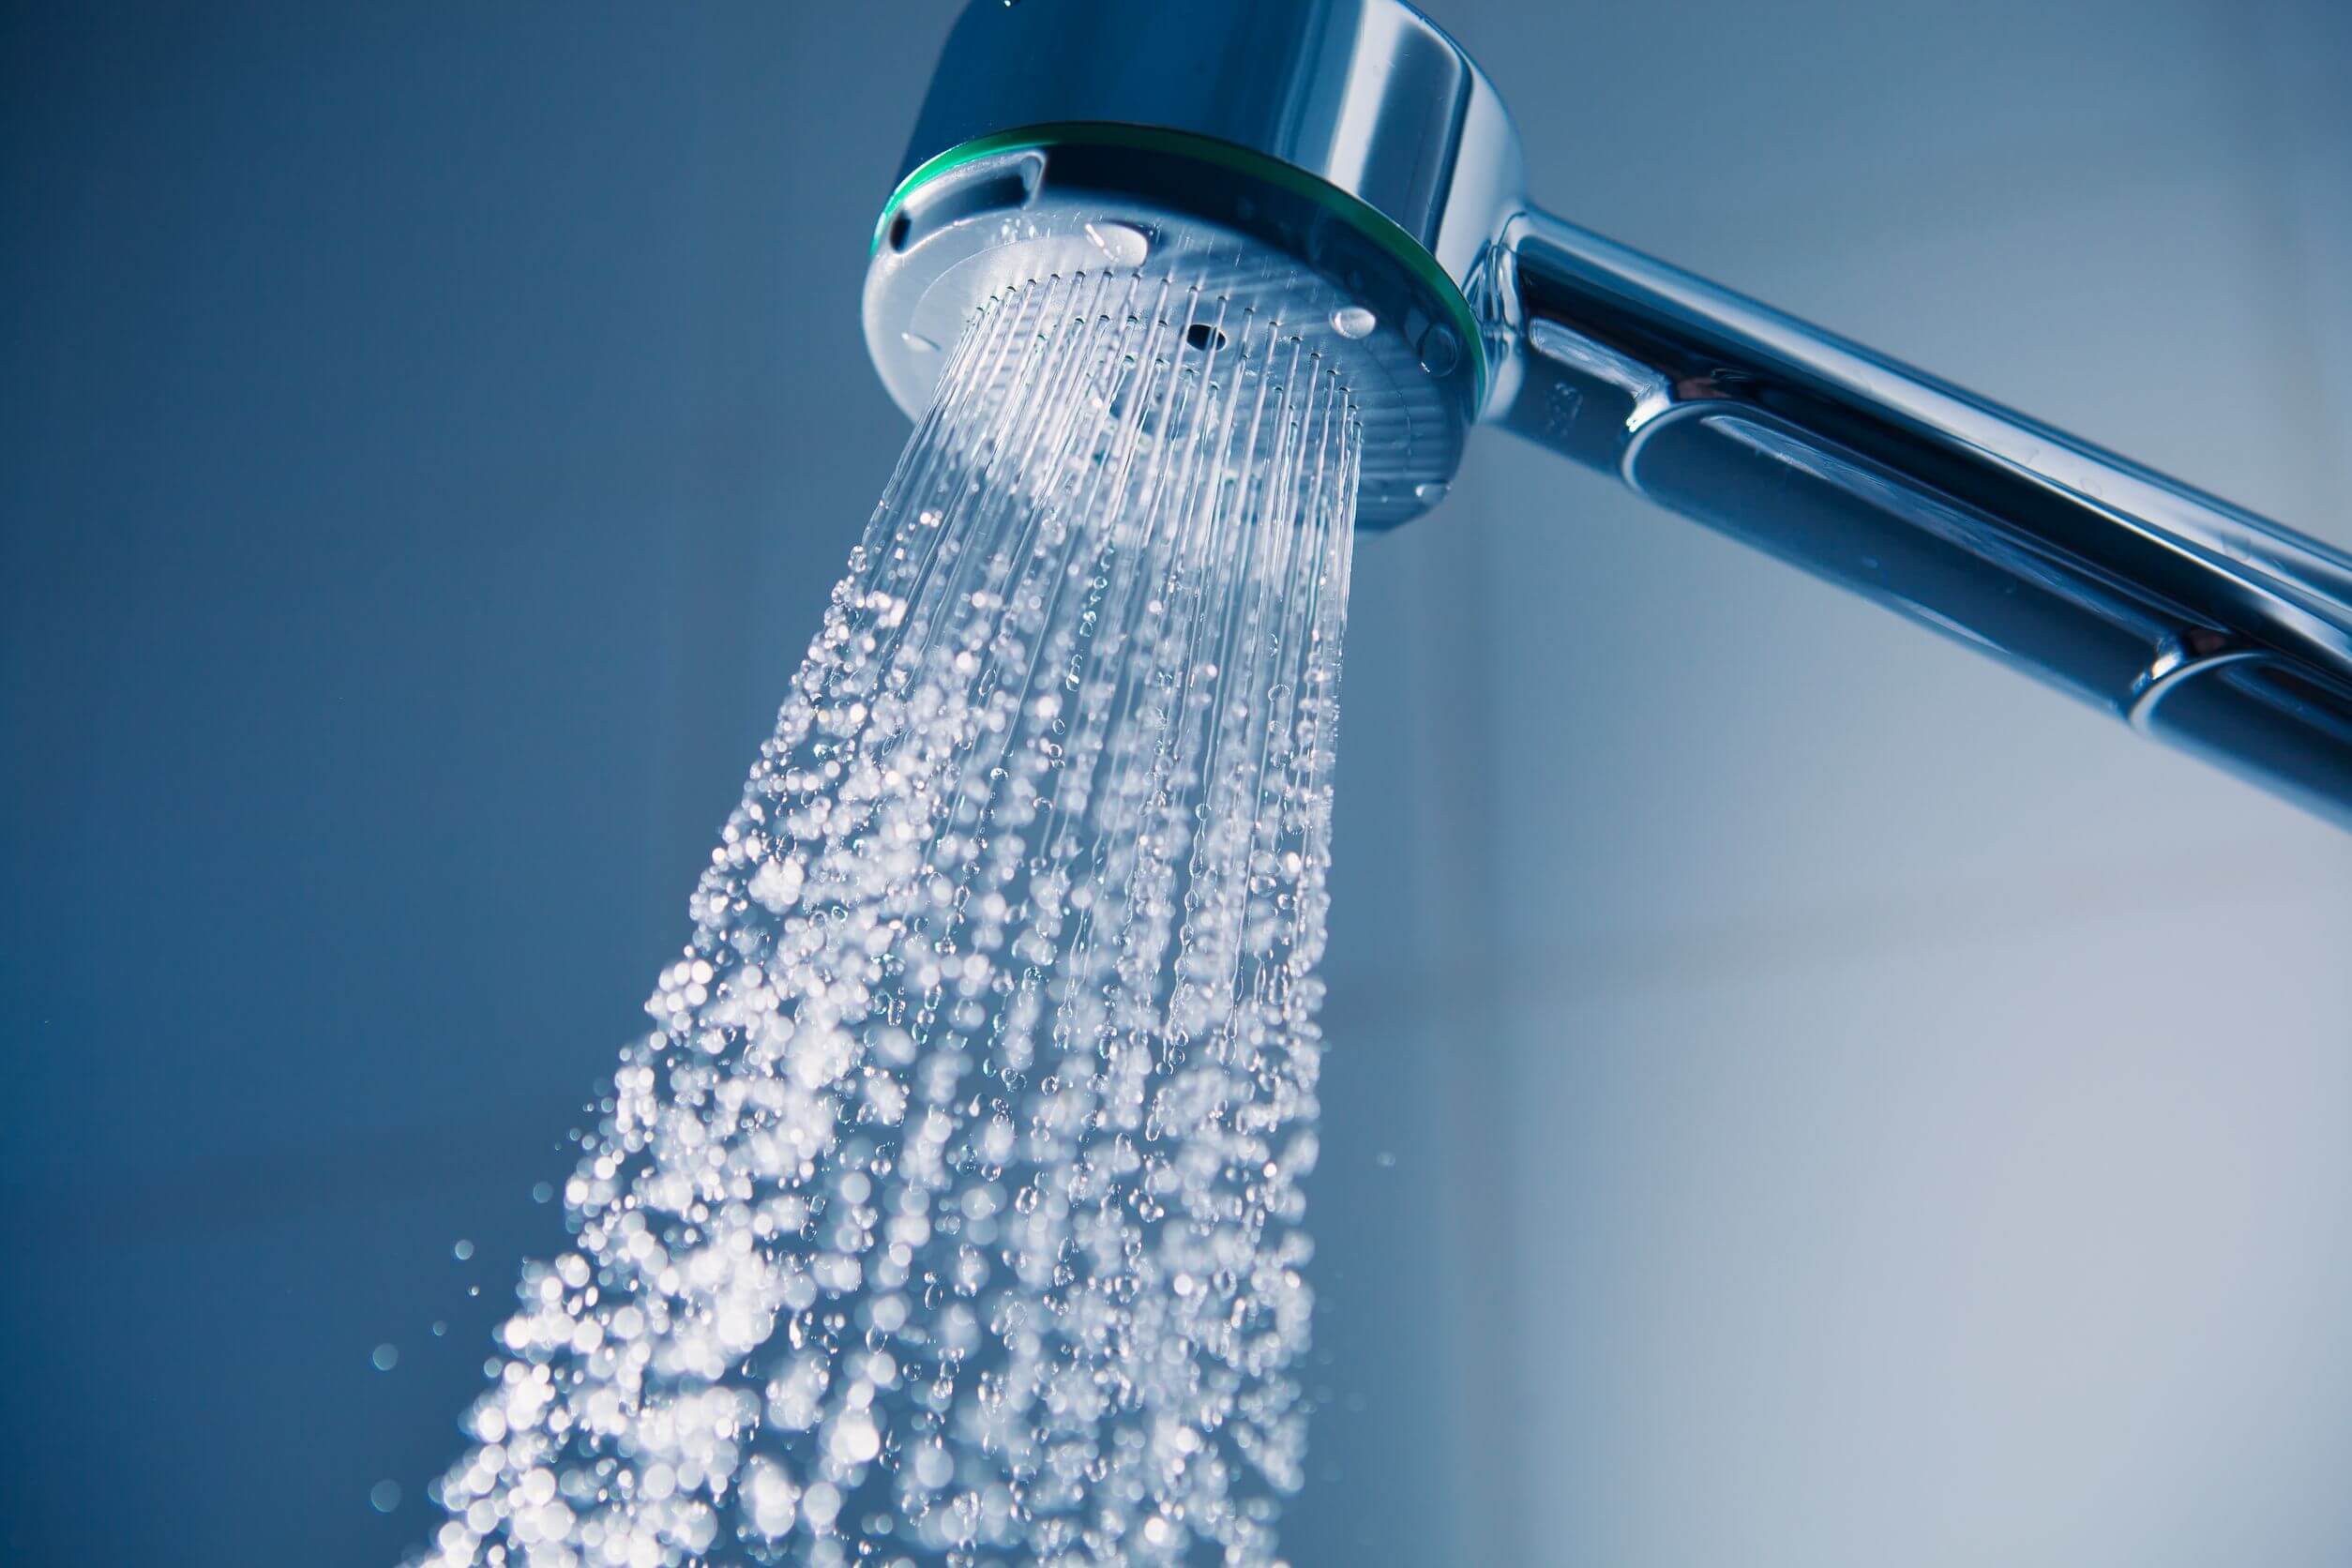 Reasons of shower not getting hot water quickly